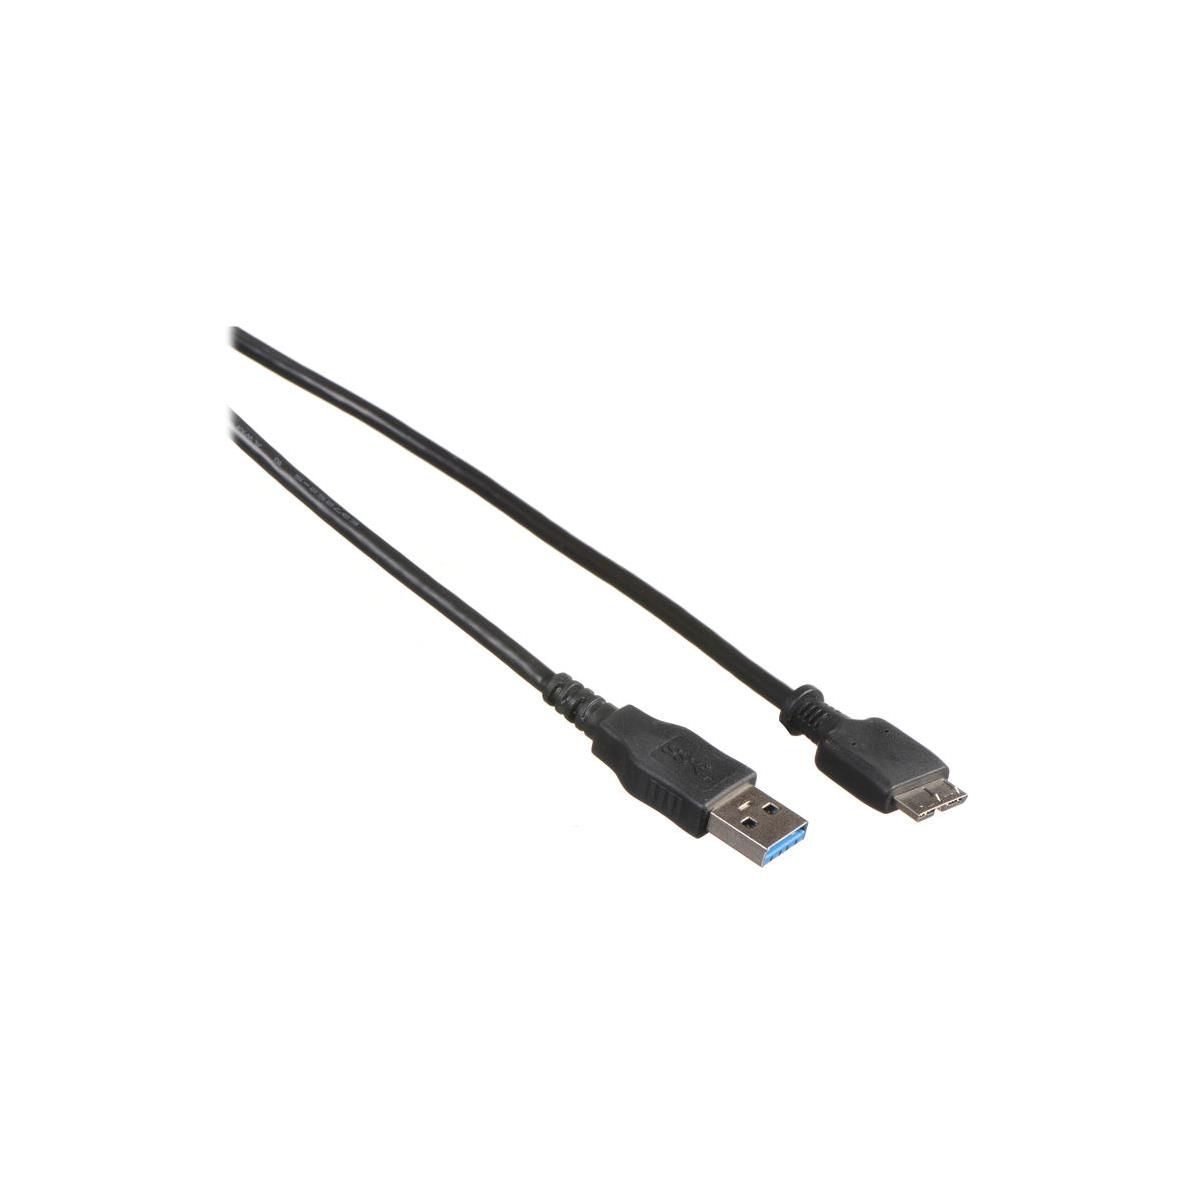 Image of Sigma AW9000 USB Cable for DP Quattro and Quattro H Cameras